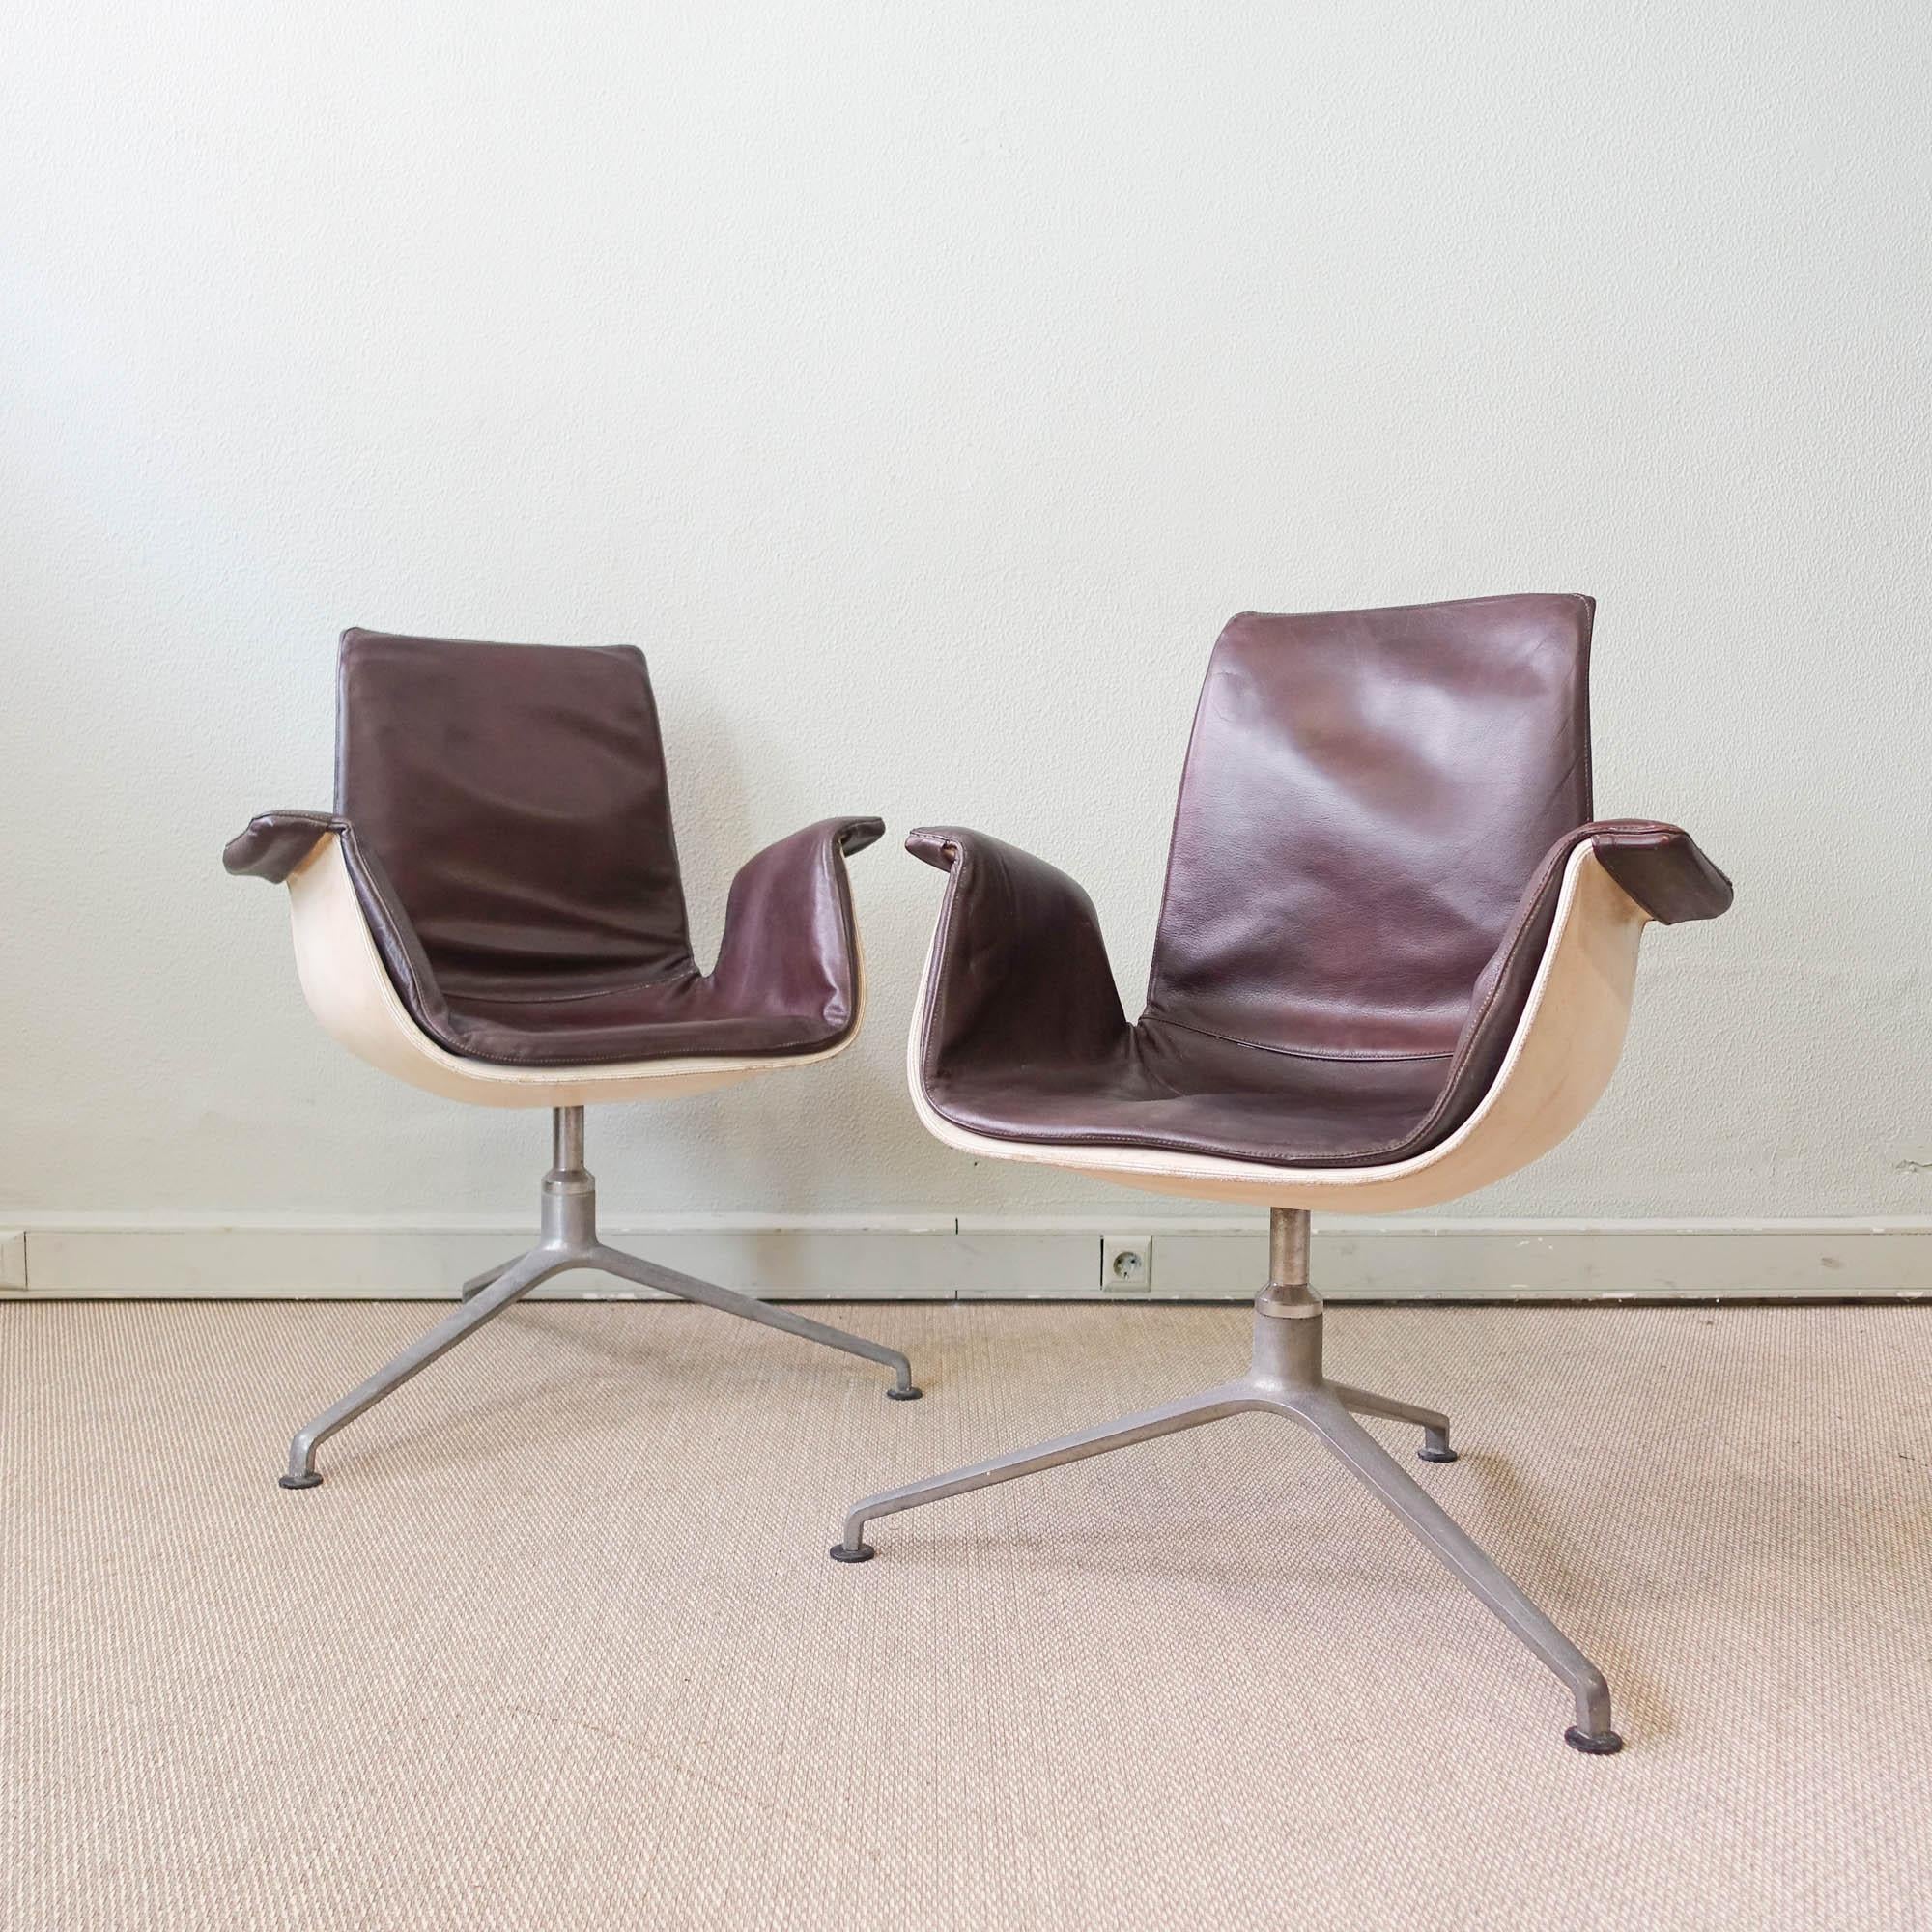 This pair of FK6727 tulip armchair was designed by Preben Fabricius & Jørgen Kastholm for Kill International, in Germany, during the 1960's. In 1964 this was a revolutionary design of a swivel armchair the chair received the Federal Prize for Good